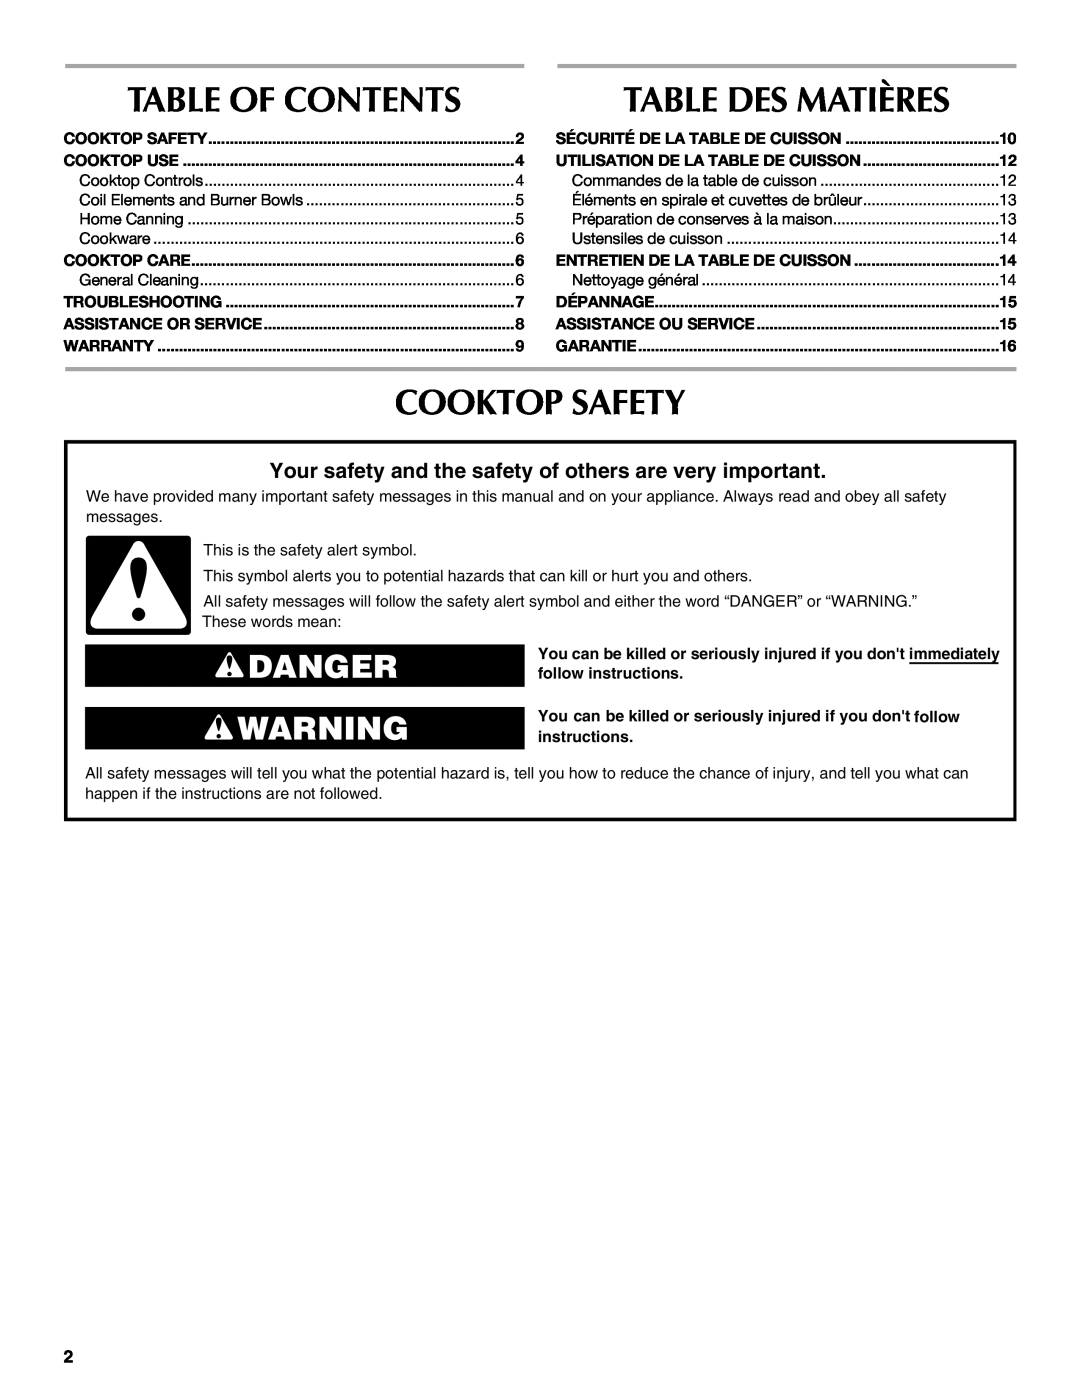 Maytag W10274251A manual Table Of Contents, Table Des Matières, Cooktop Safety, Danger 